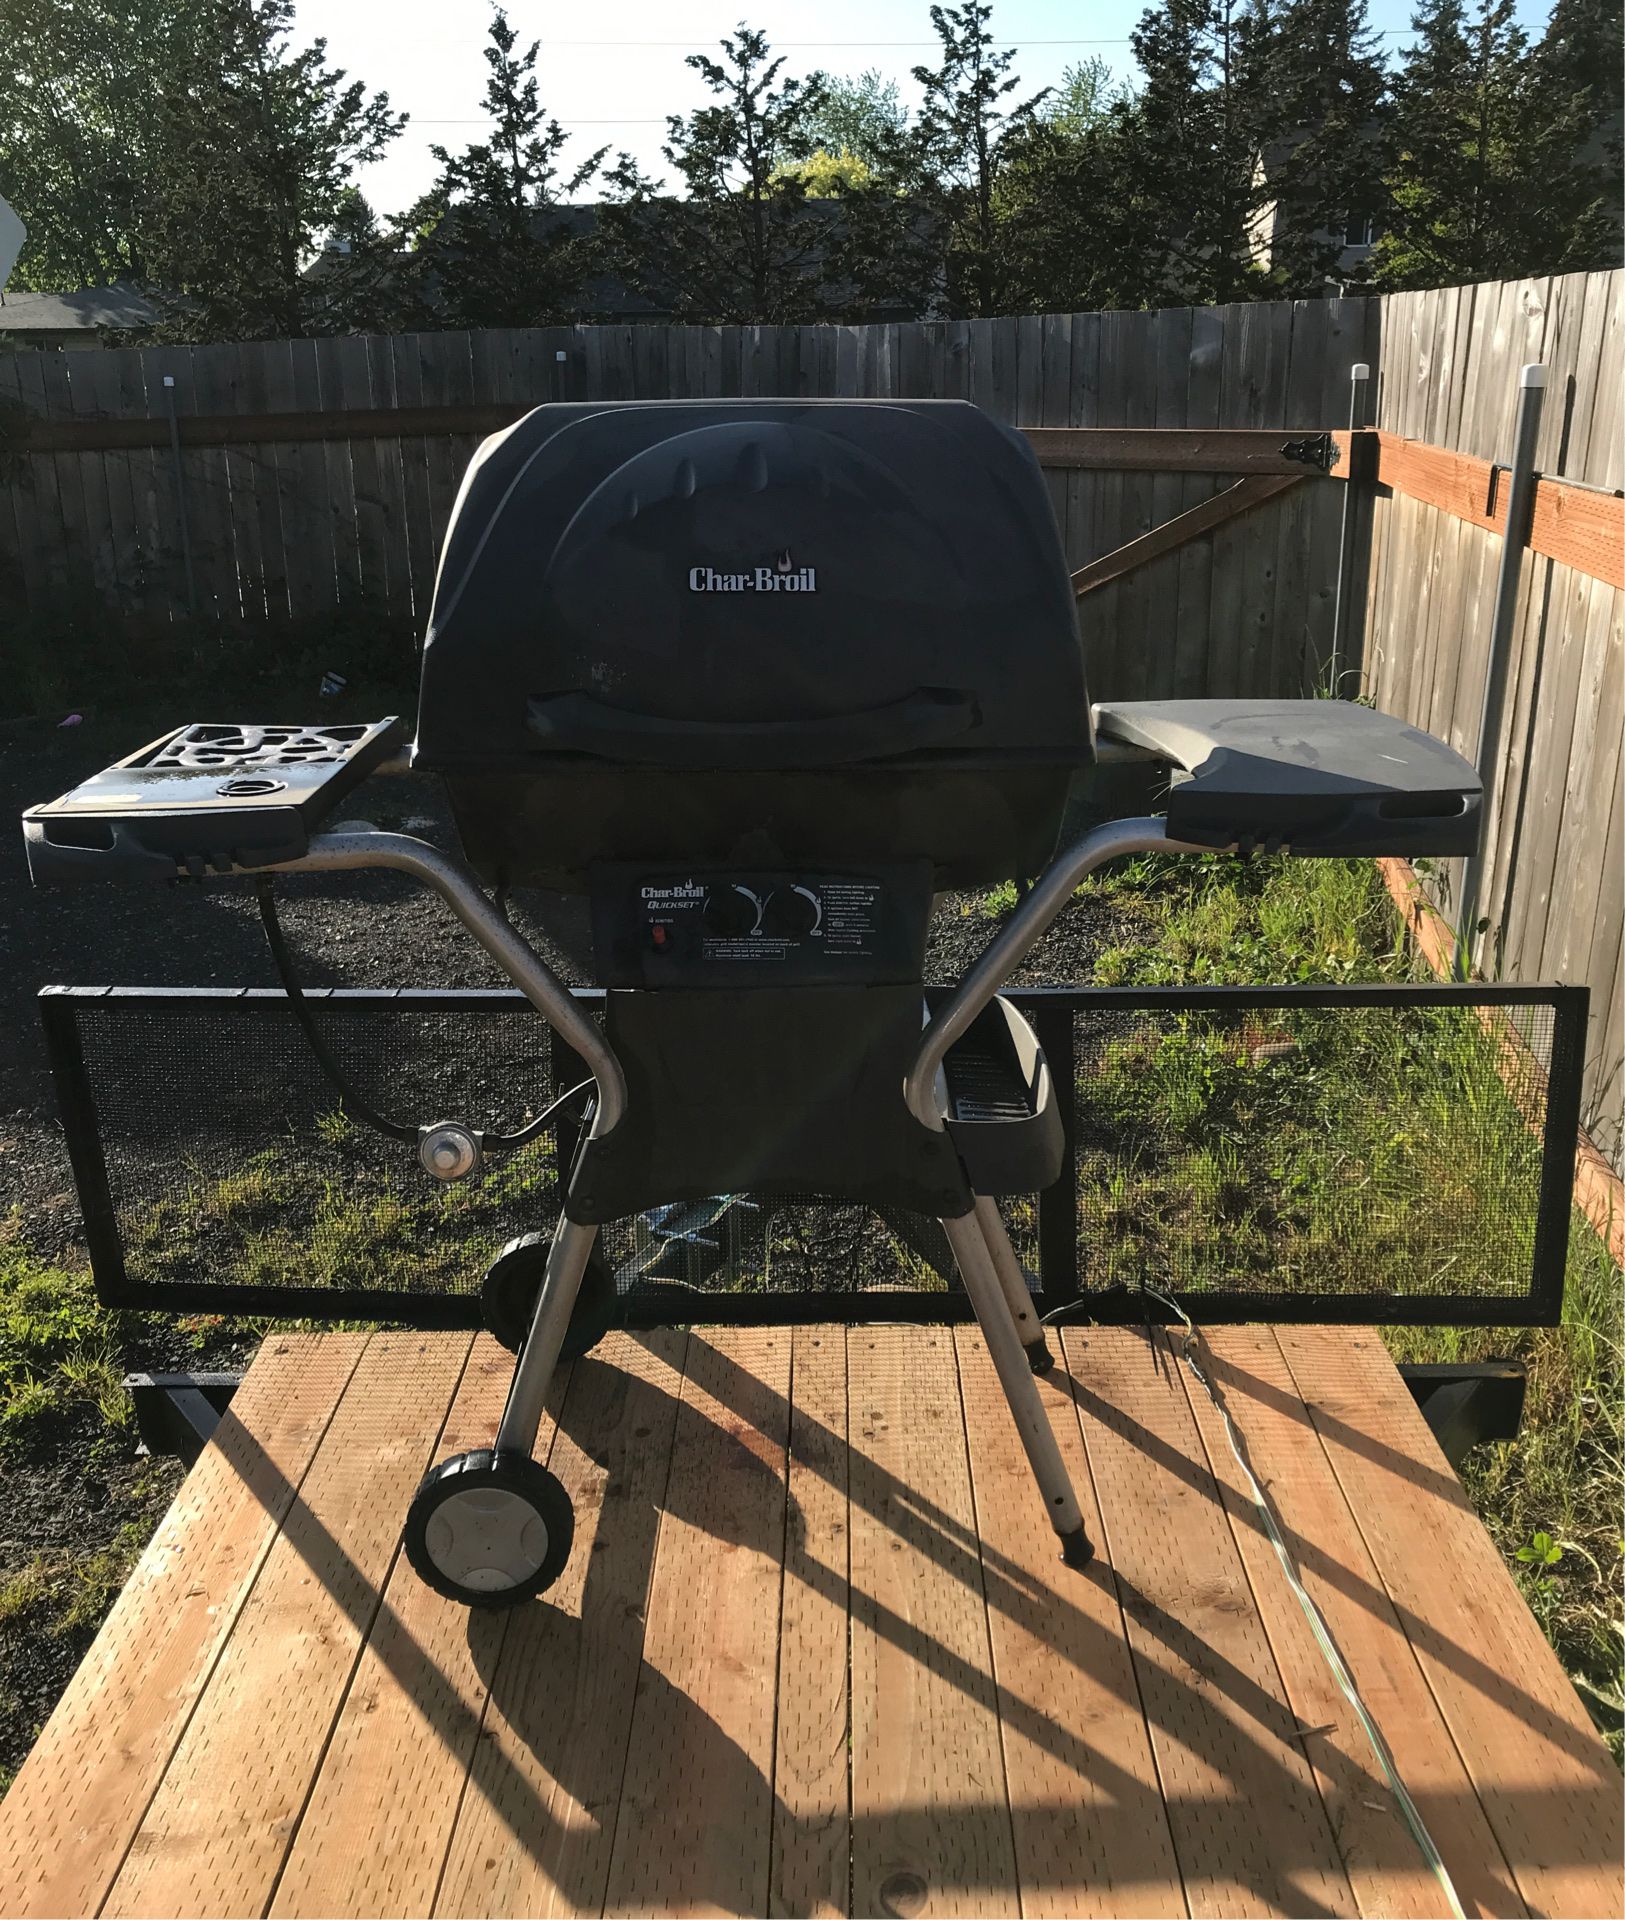 Charlie broil grill